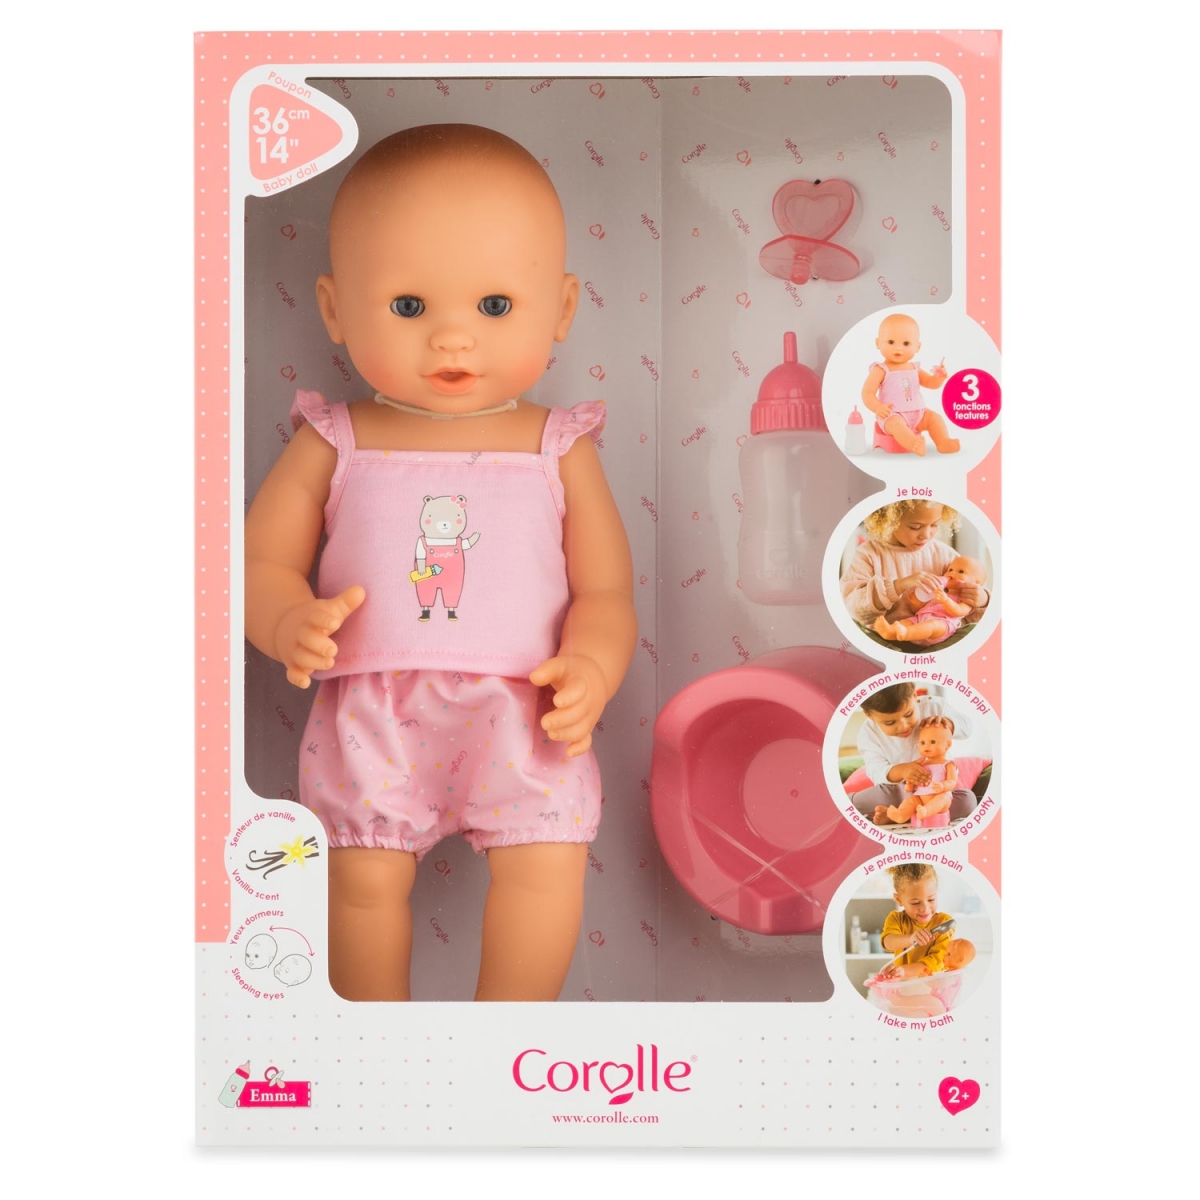 Corolle Girls - Kidstop toys and books